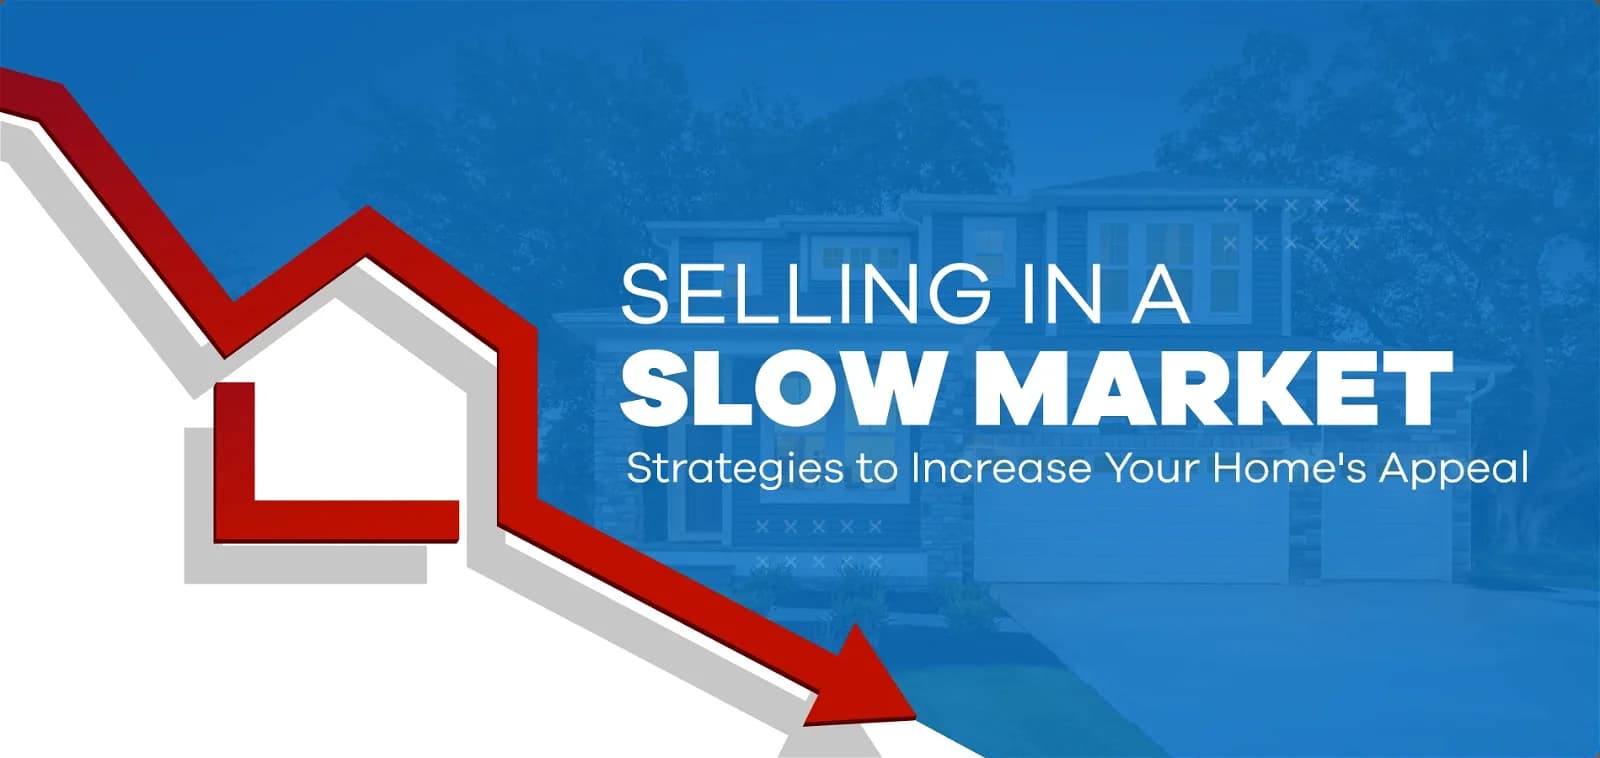 Selling in a Slow Market: Strategies To Increase Your Home’s Appeal